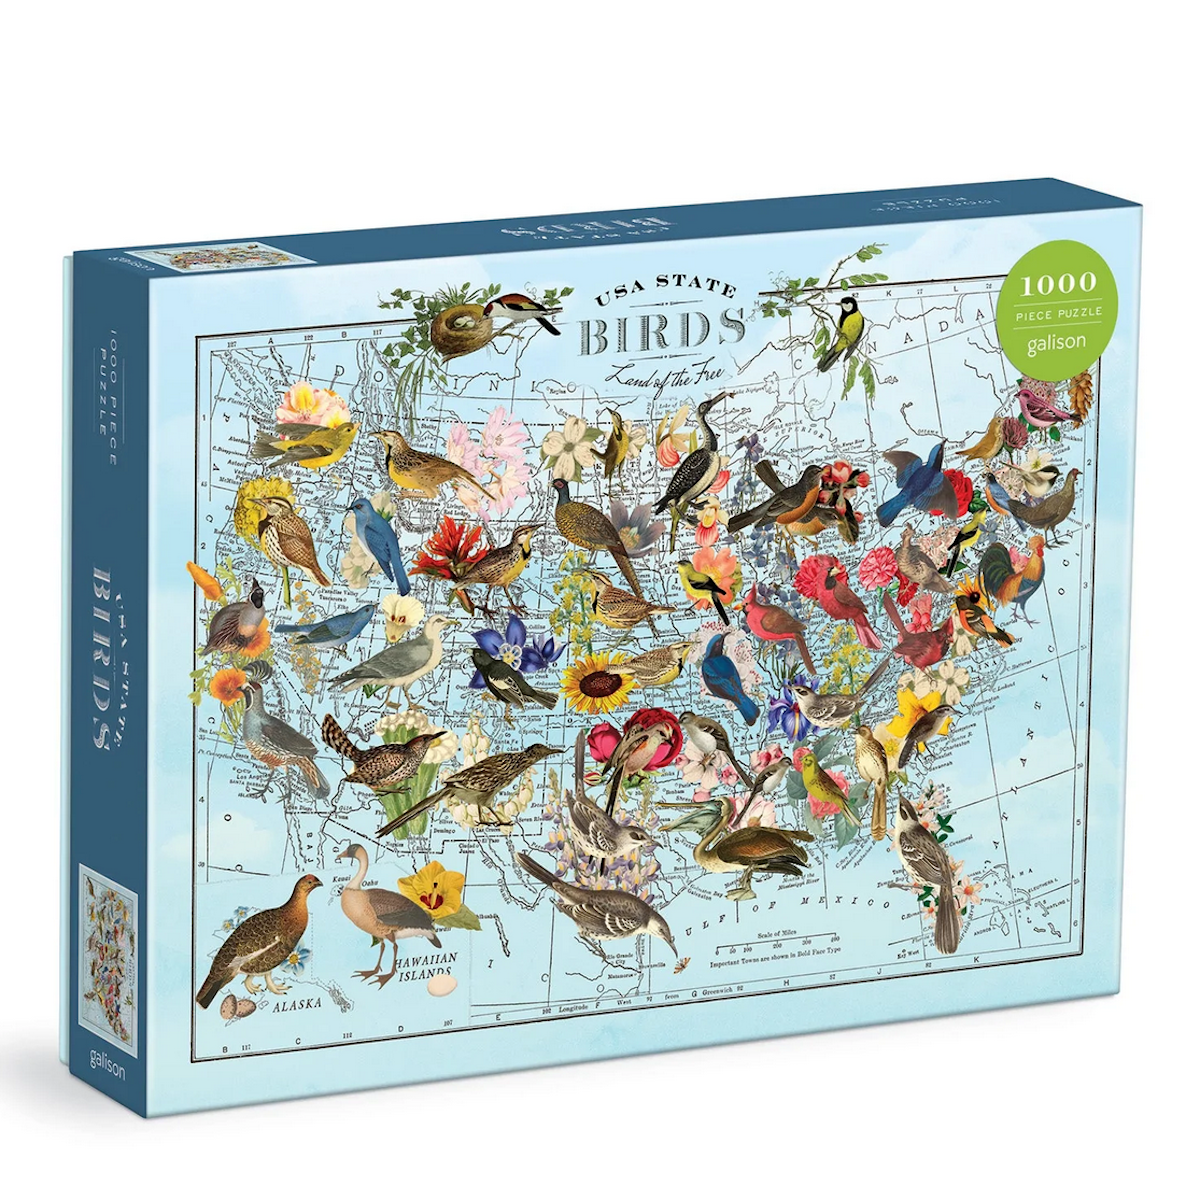 State Birds Wendy Gold Galison Puzzle 1000 pcs